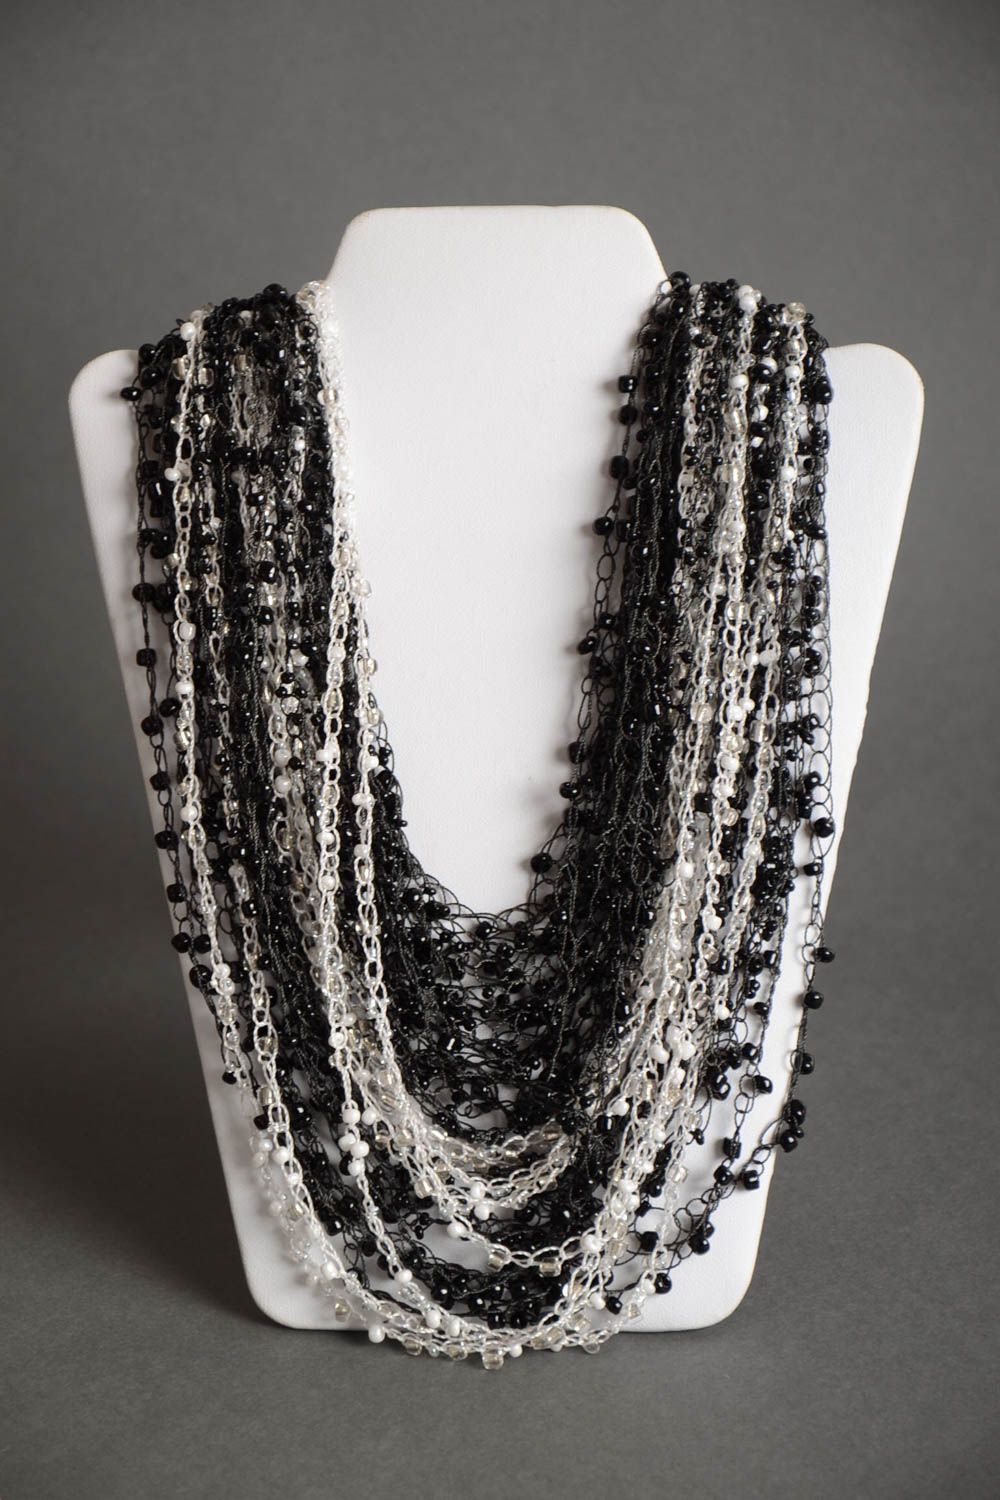 Handmade volume necklace crocheted of Czech beads in black and white colors photo 2